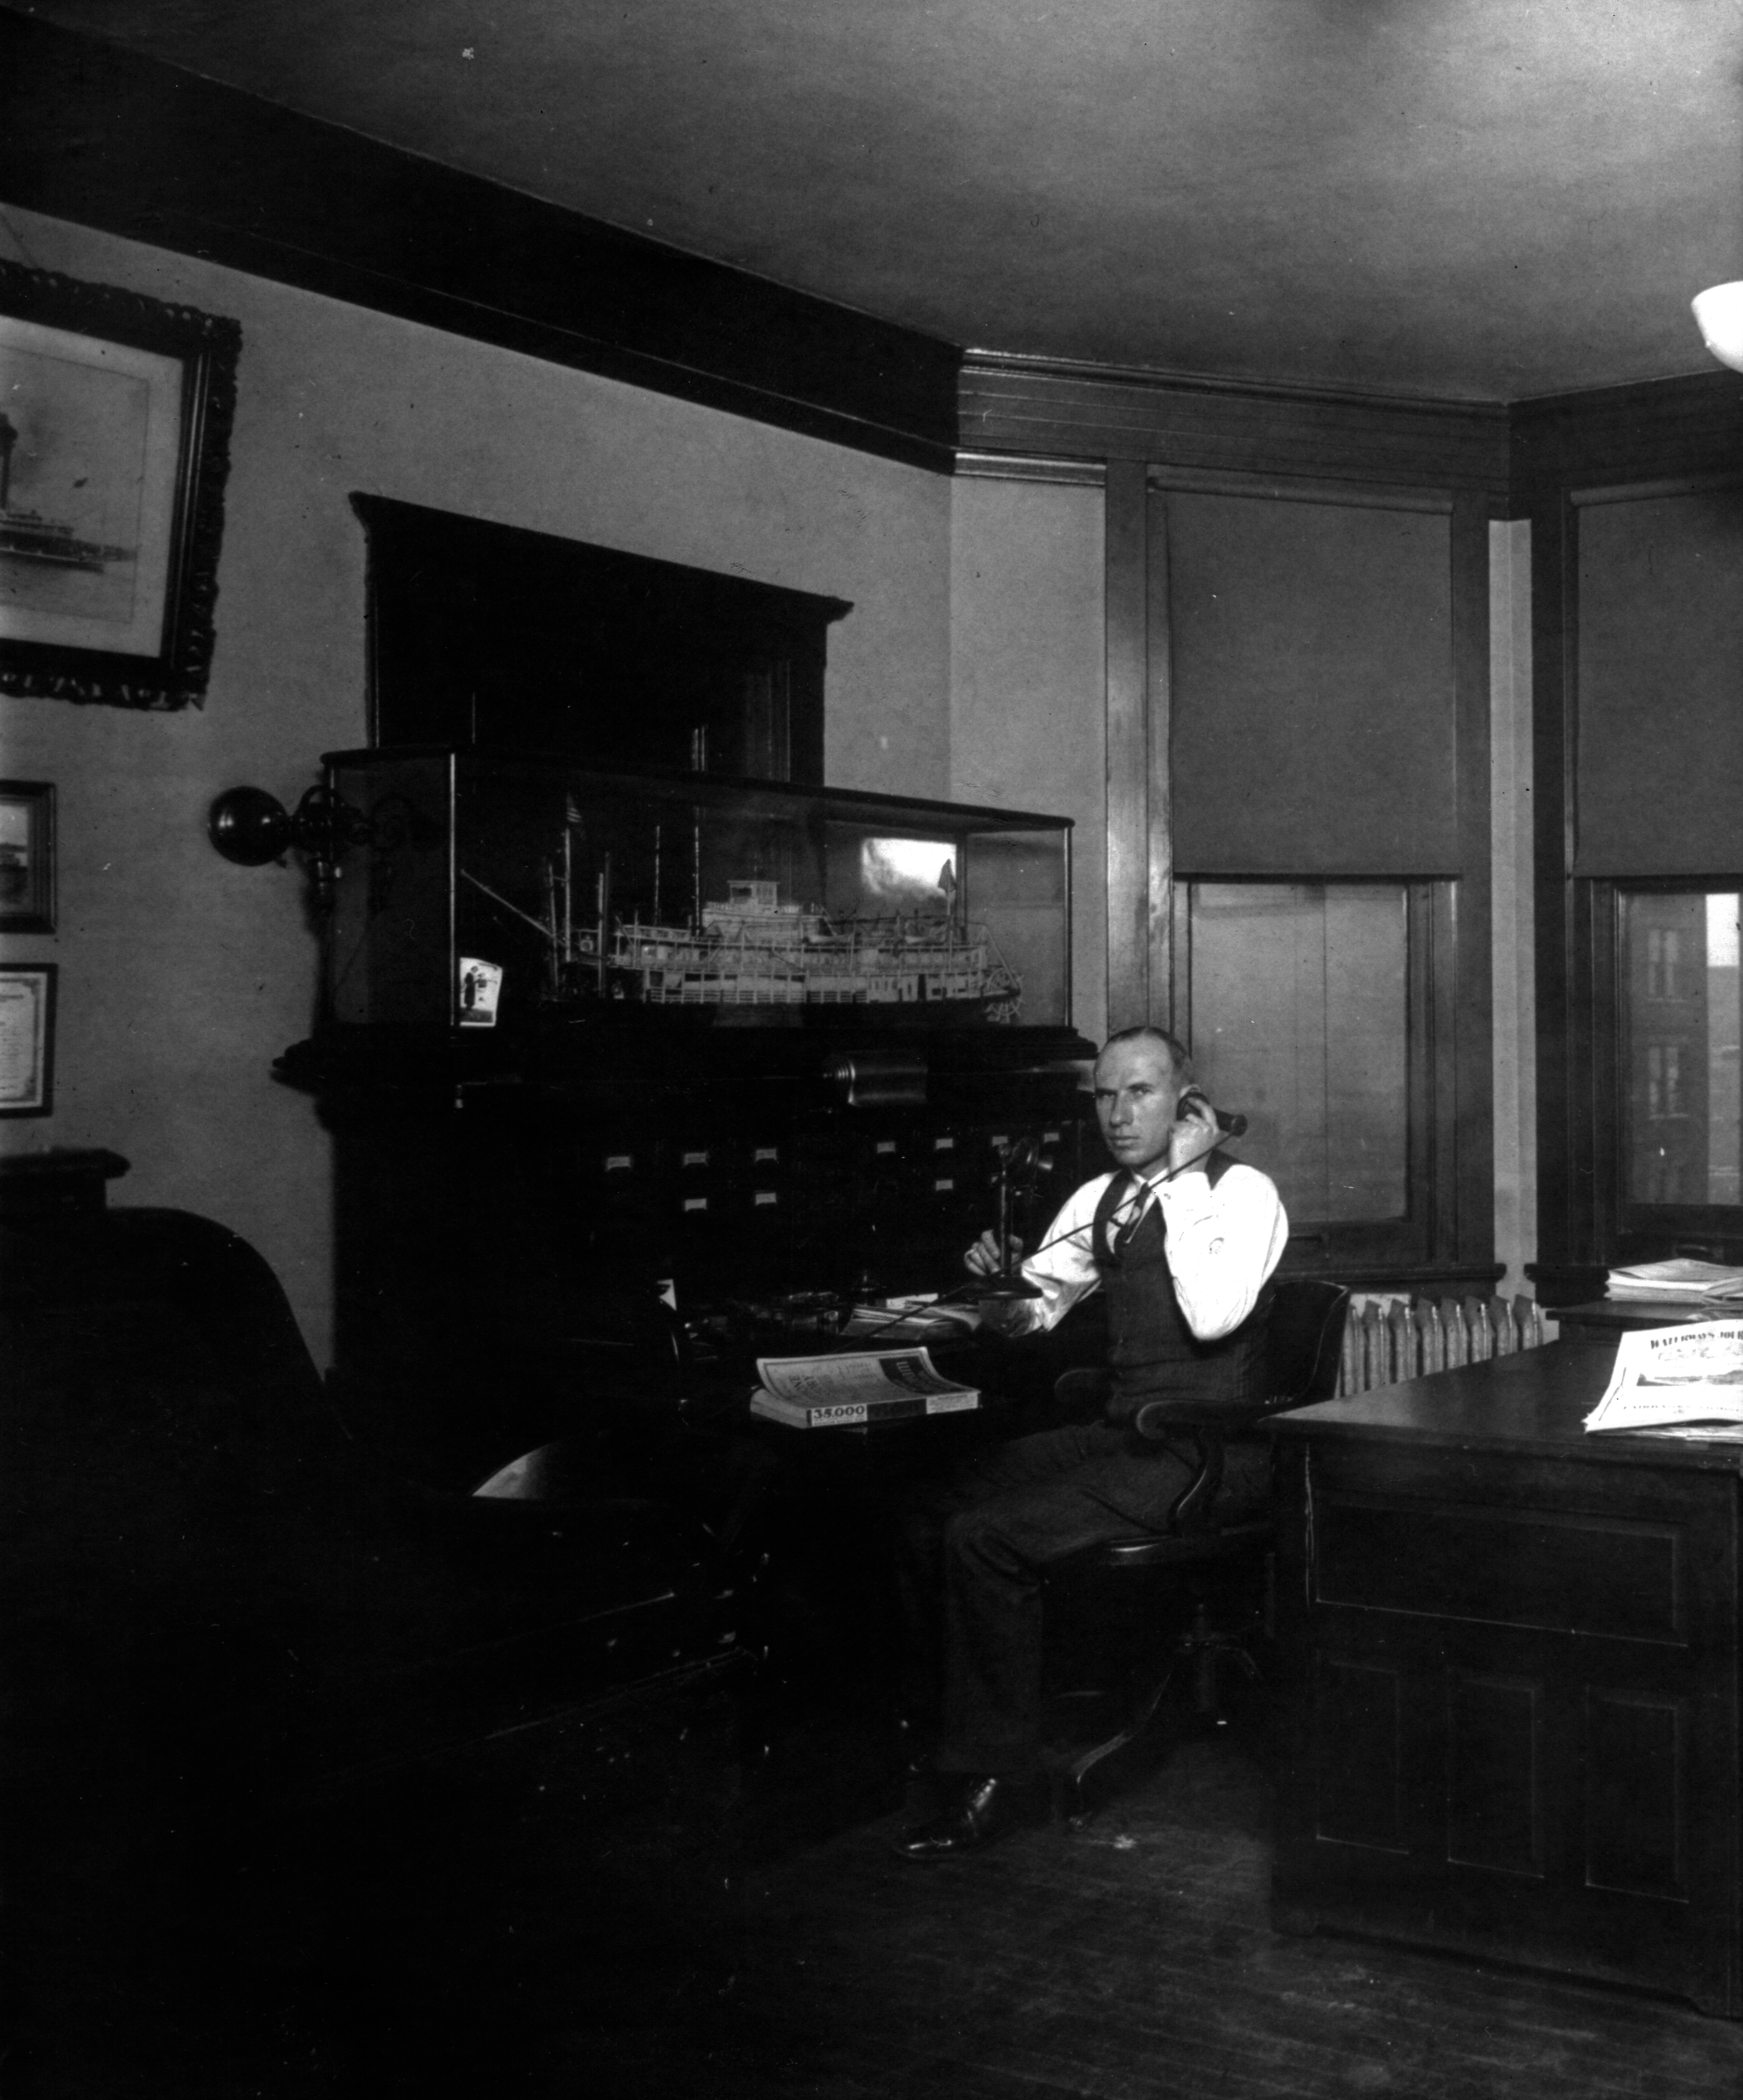 (Image: Capt. Donald T. Wright seated at a desk)